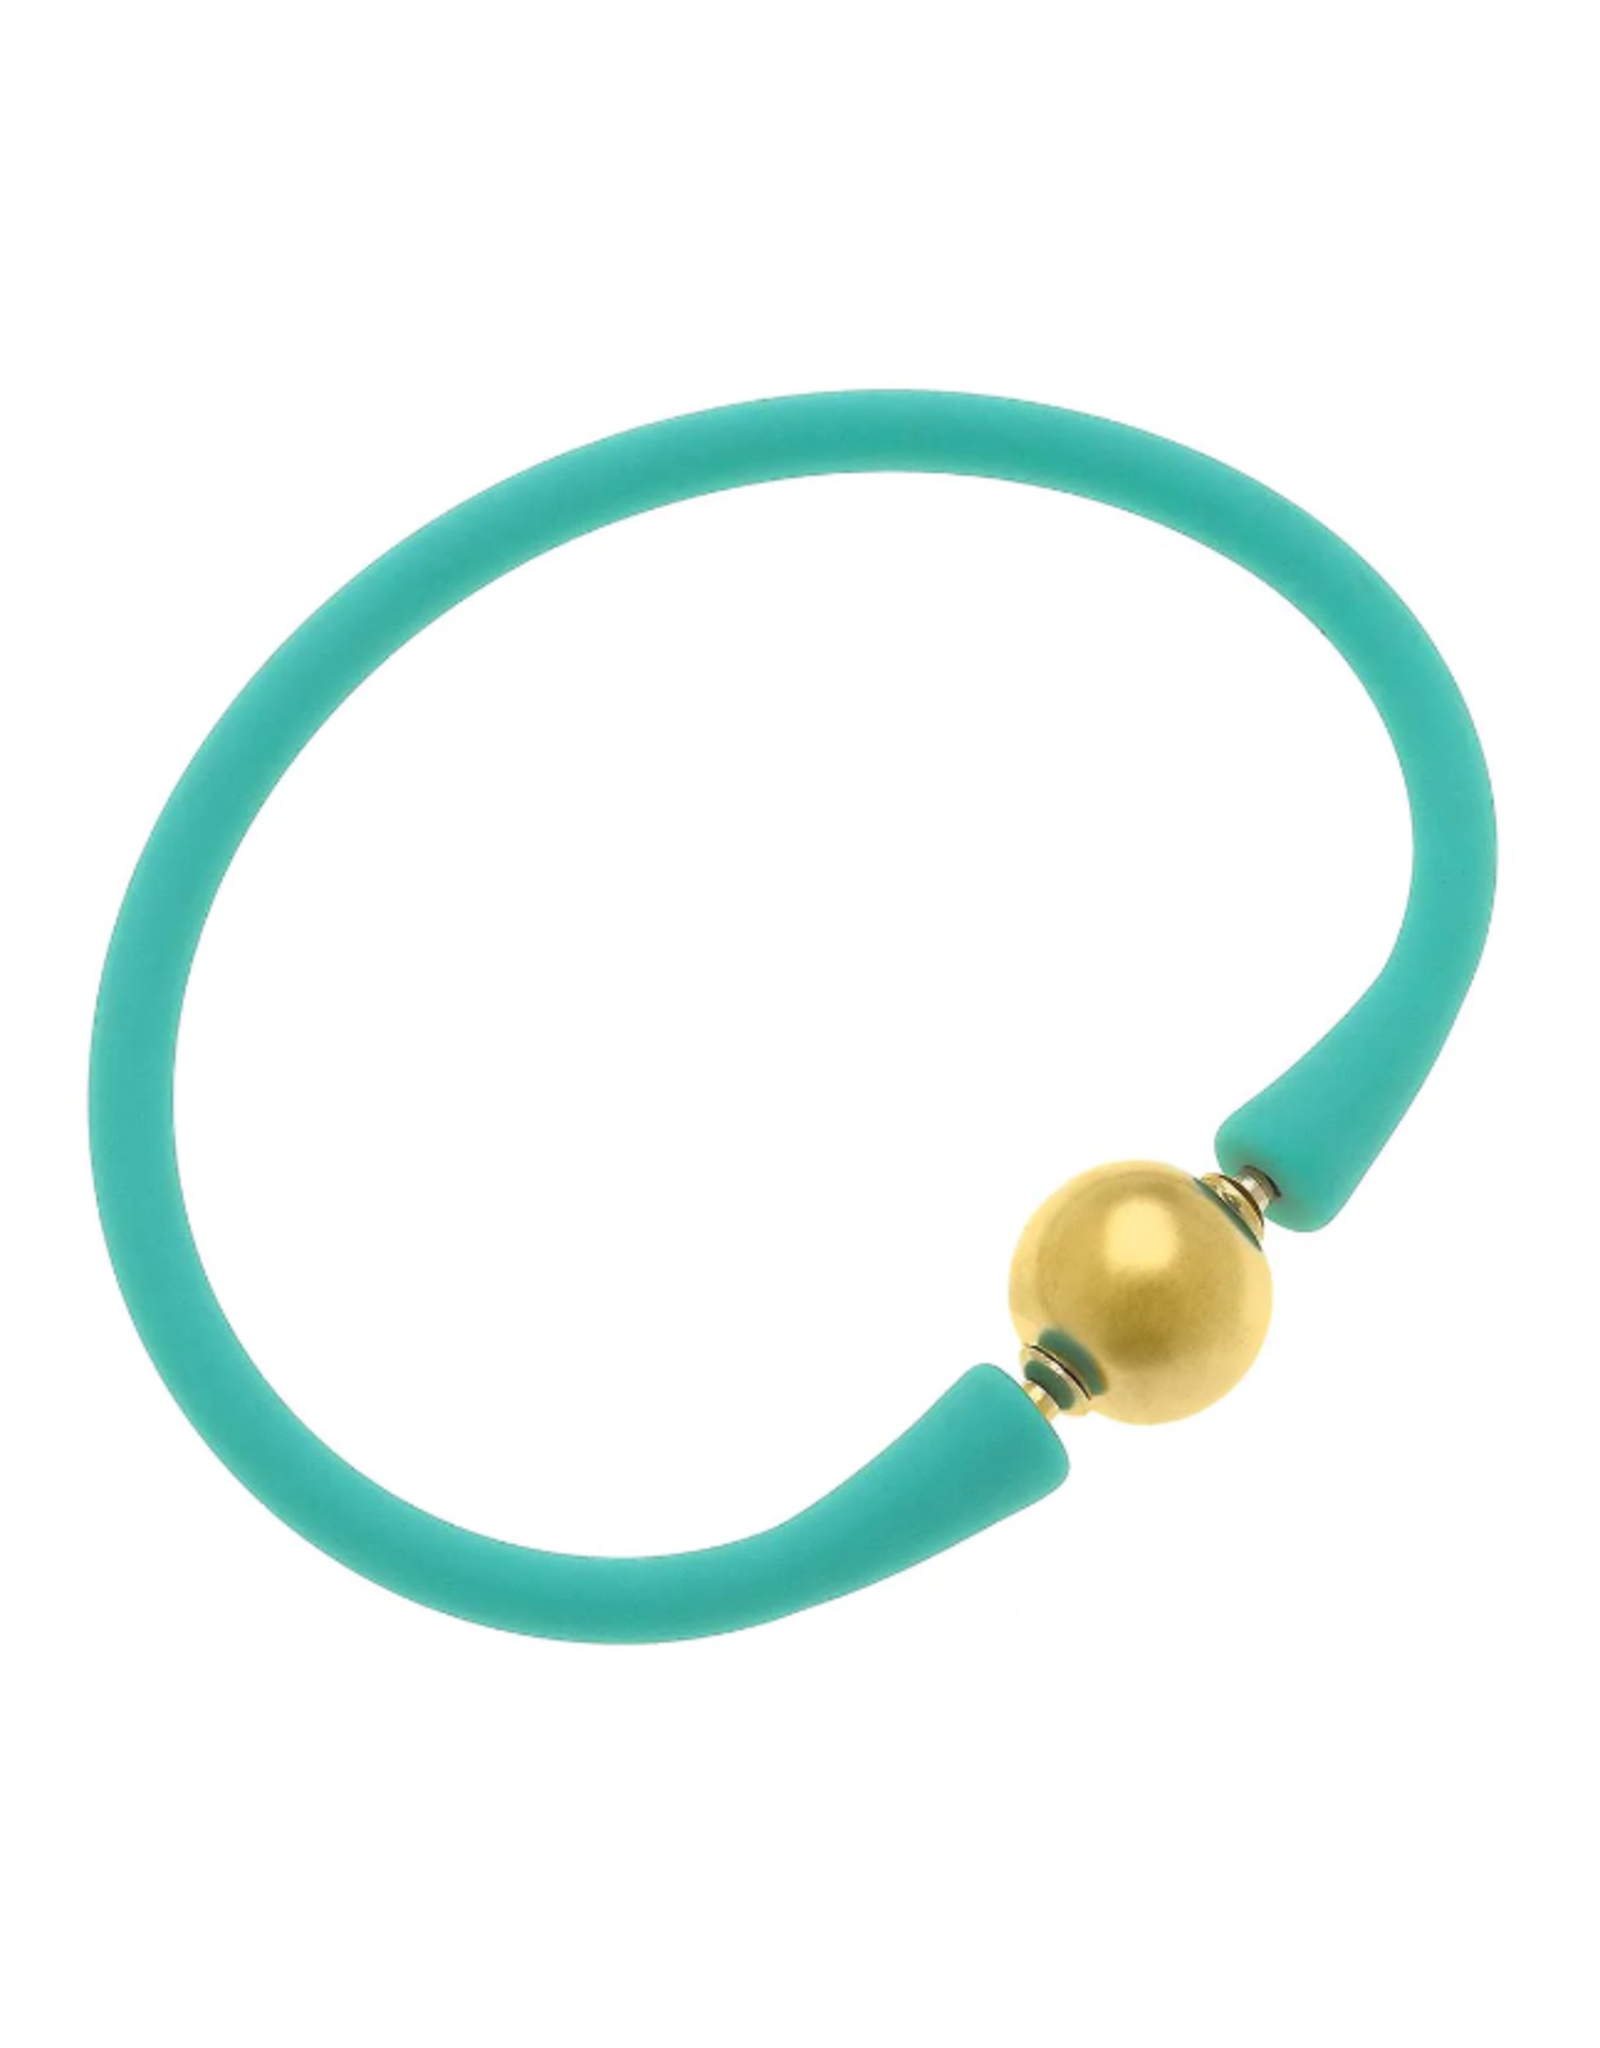 Bali 24K Gold Plated Ball Bead Silicone Bracelet Mint